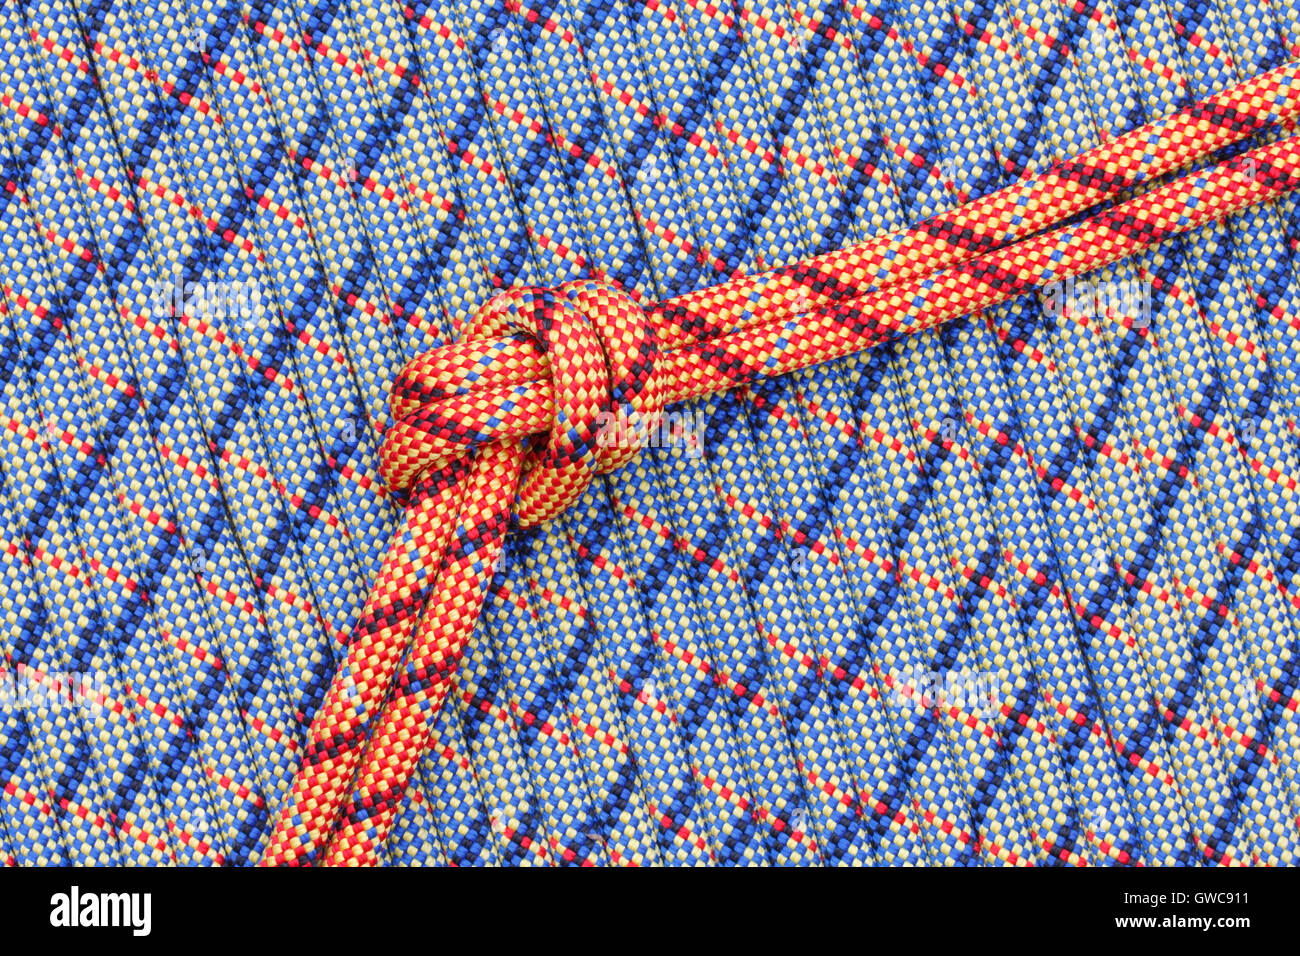 Bright colored rope with a overhand knot on a background of ropes Stock Photo